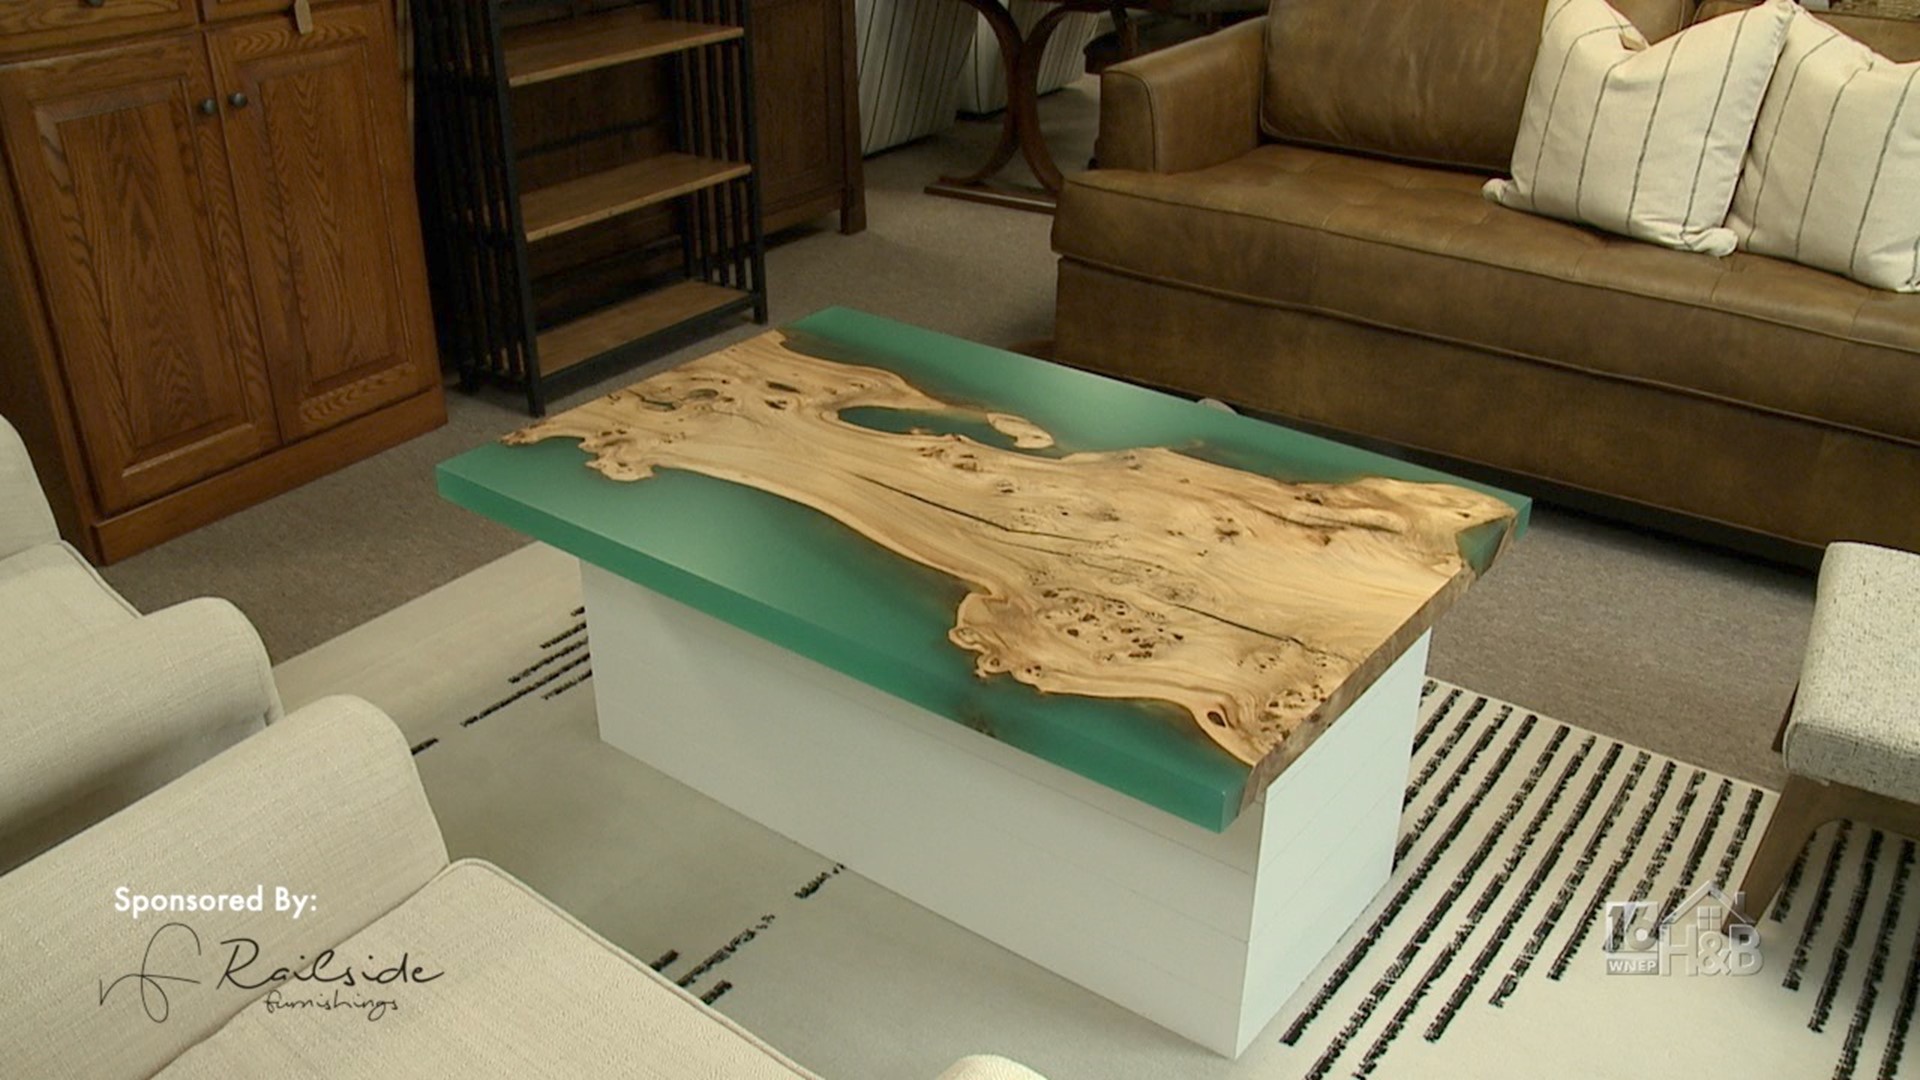 VIDEO: How to Make a Live-Edge and Epoxy Table - Woodworking